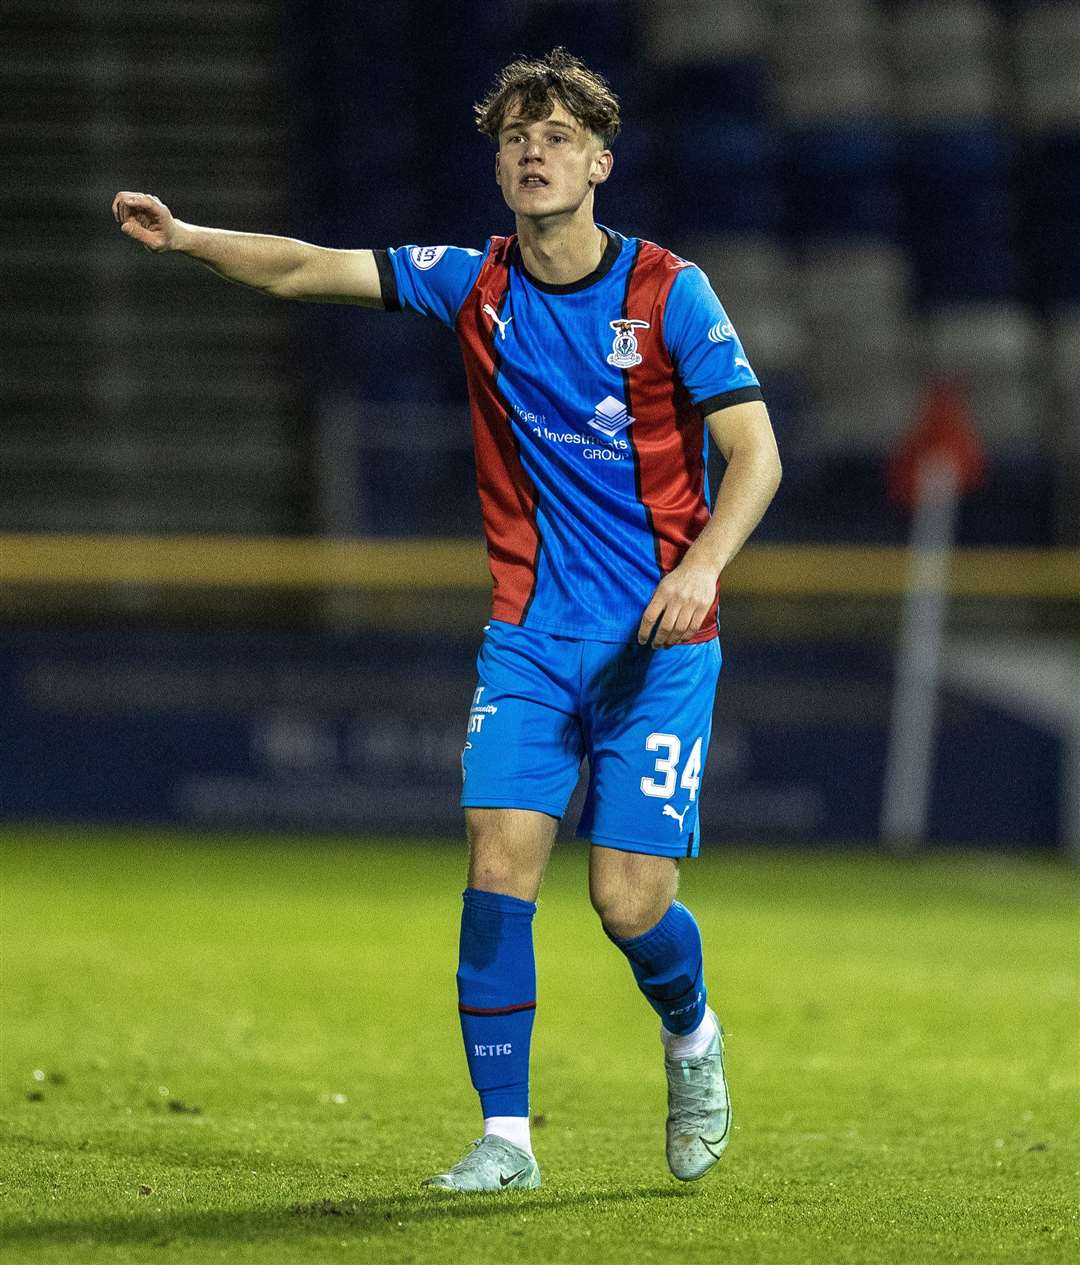 Picture - Ken Macpherson. Inverness CT(0) v Hamilton(1). 18/10/22. ICT’s Matthew Strachan made his debut after being introduced as a late sub.